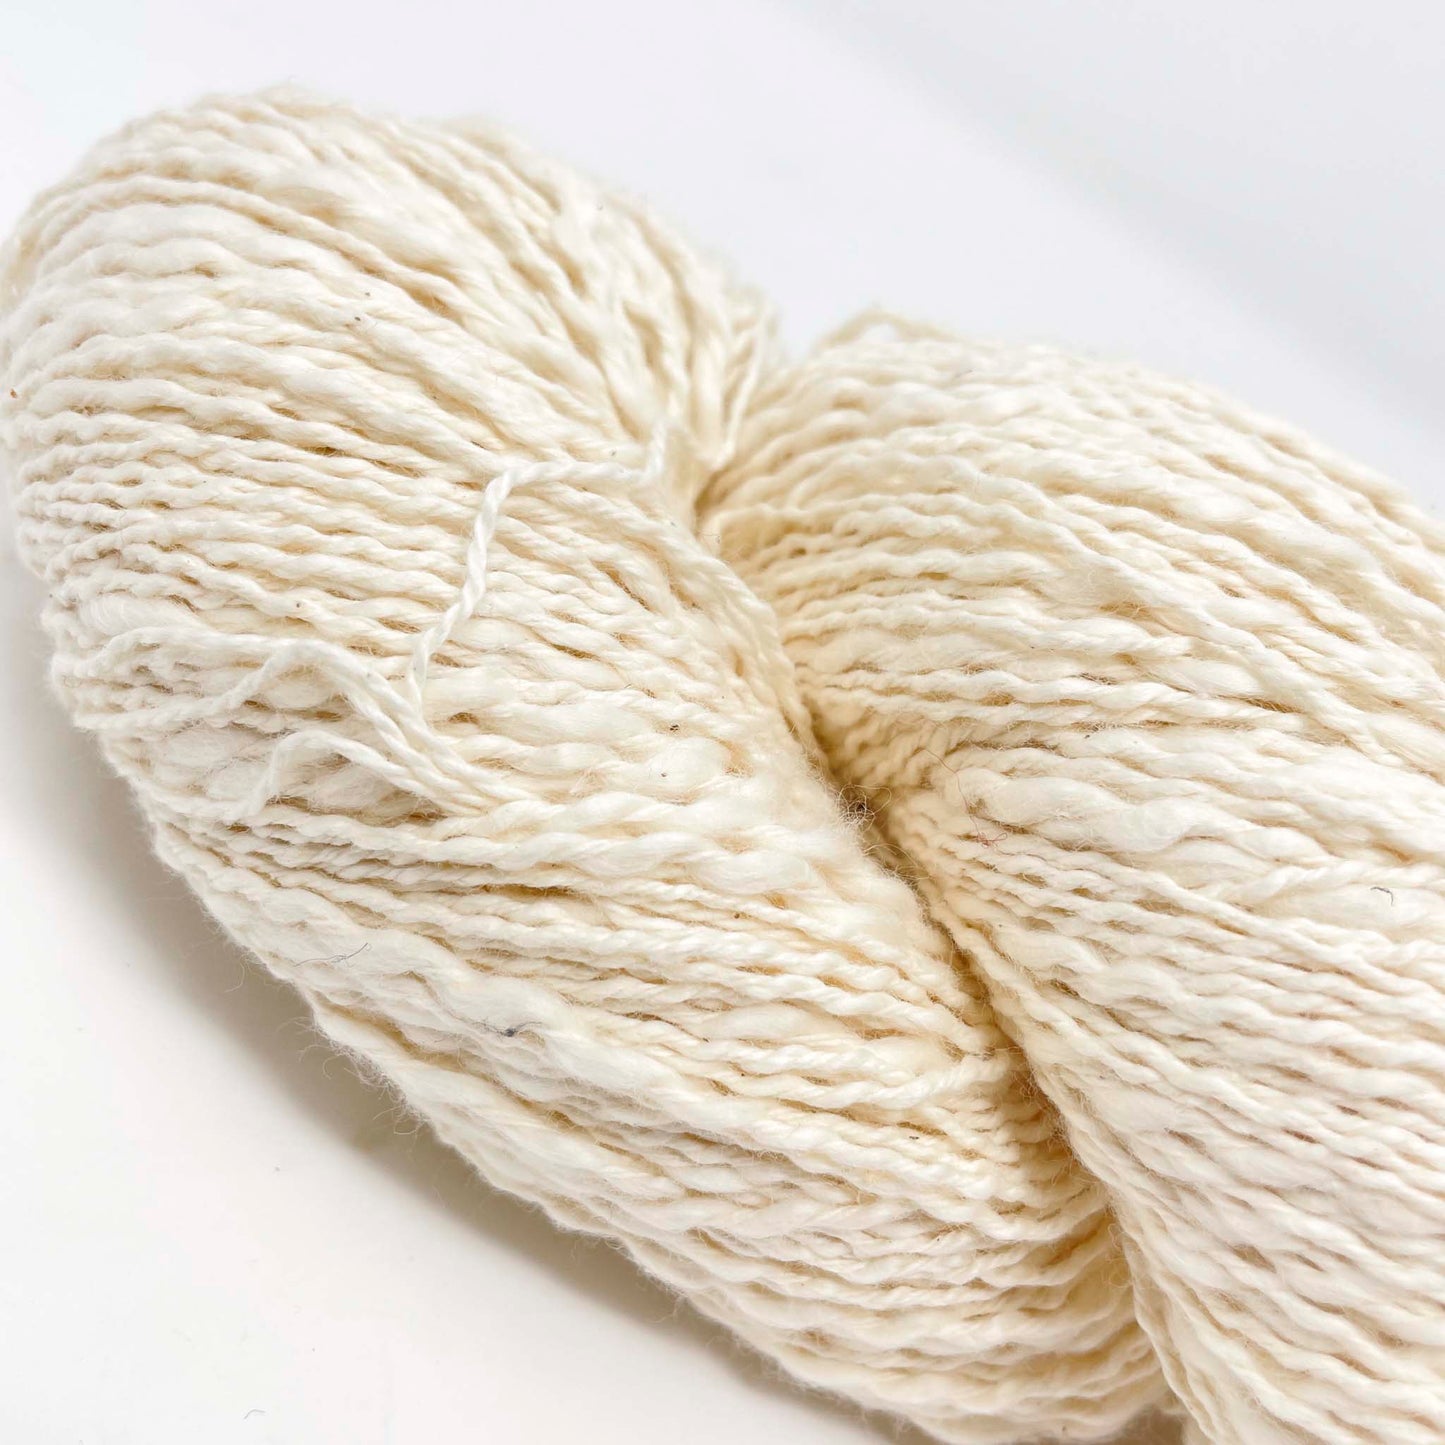 Specialty Wavy Weave Yarn - Natural (7.9 oz)